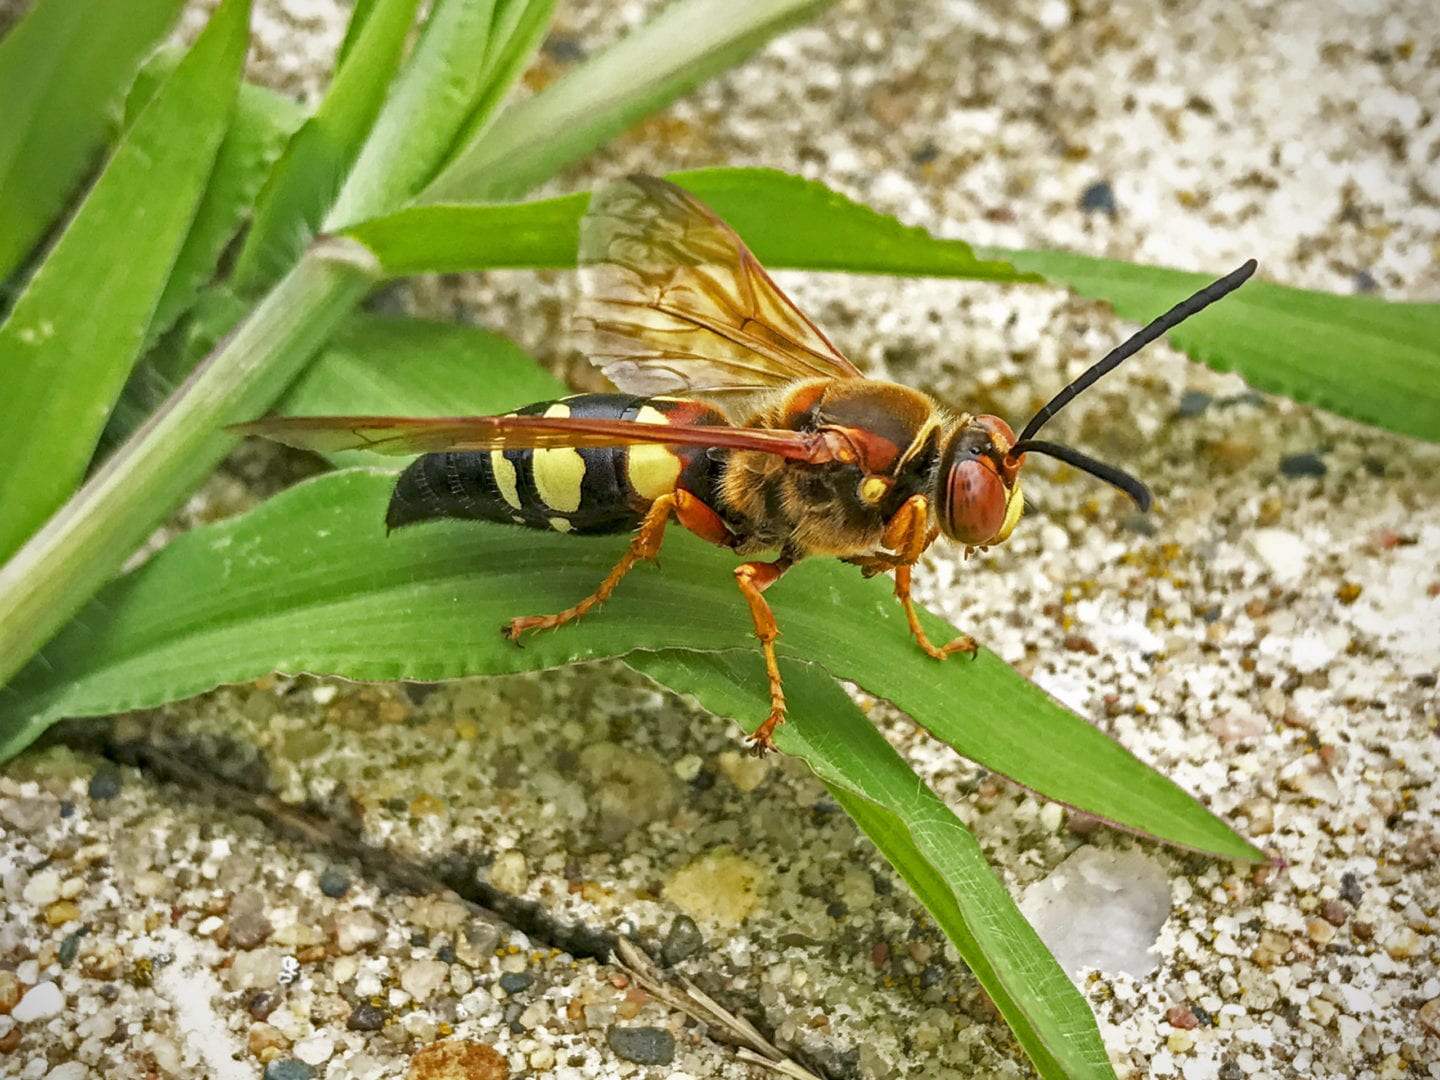 Cicada Killer Control How to Get Rid of Wasps Rose